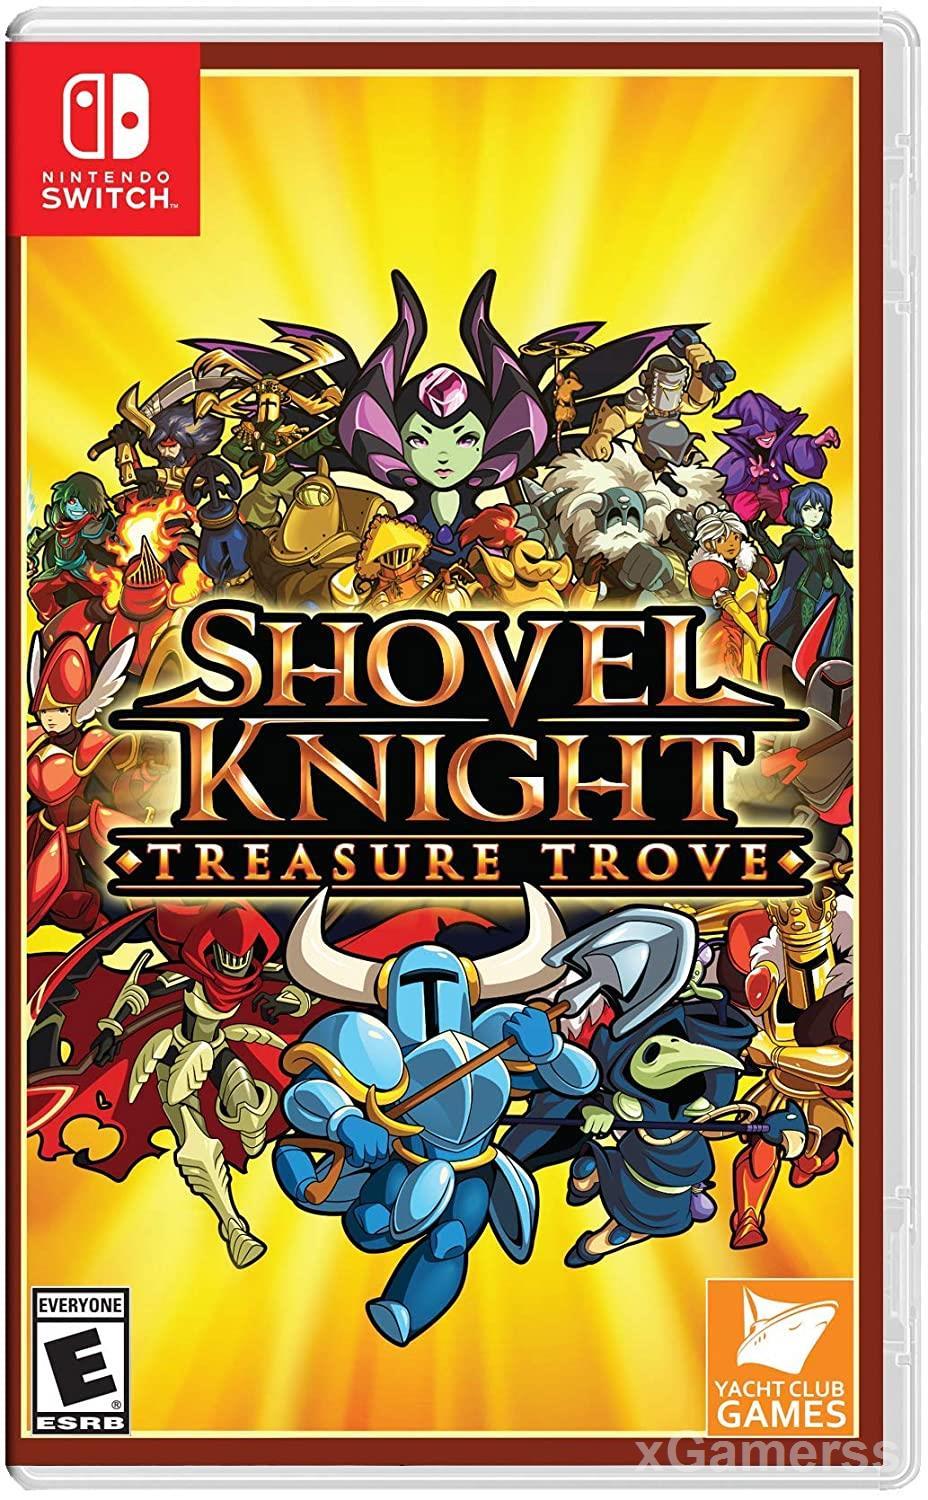 Shovel Knight is another popular game 